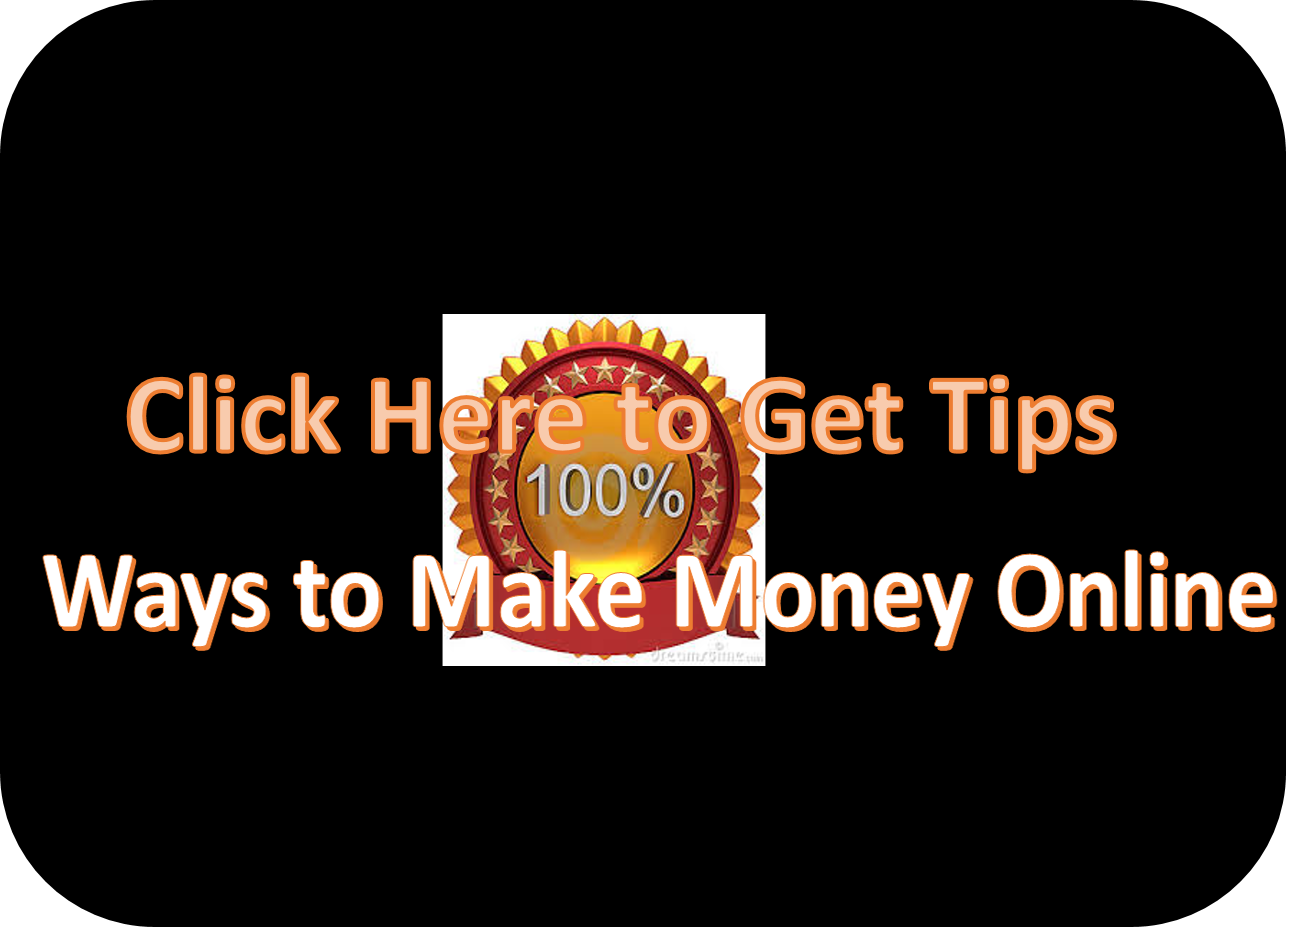 Click here to get fast and guaranteed Ways to Make Money Online